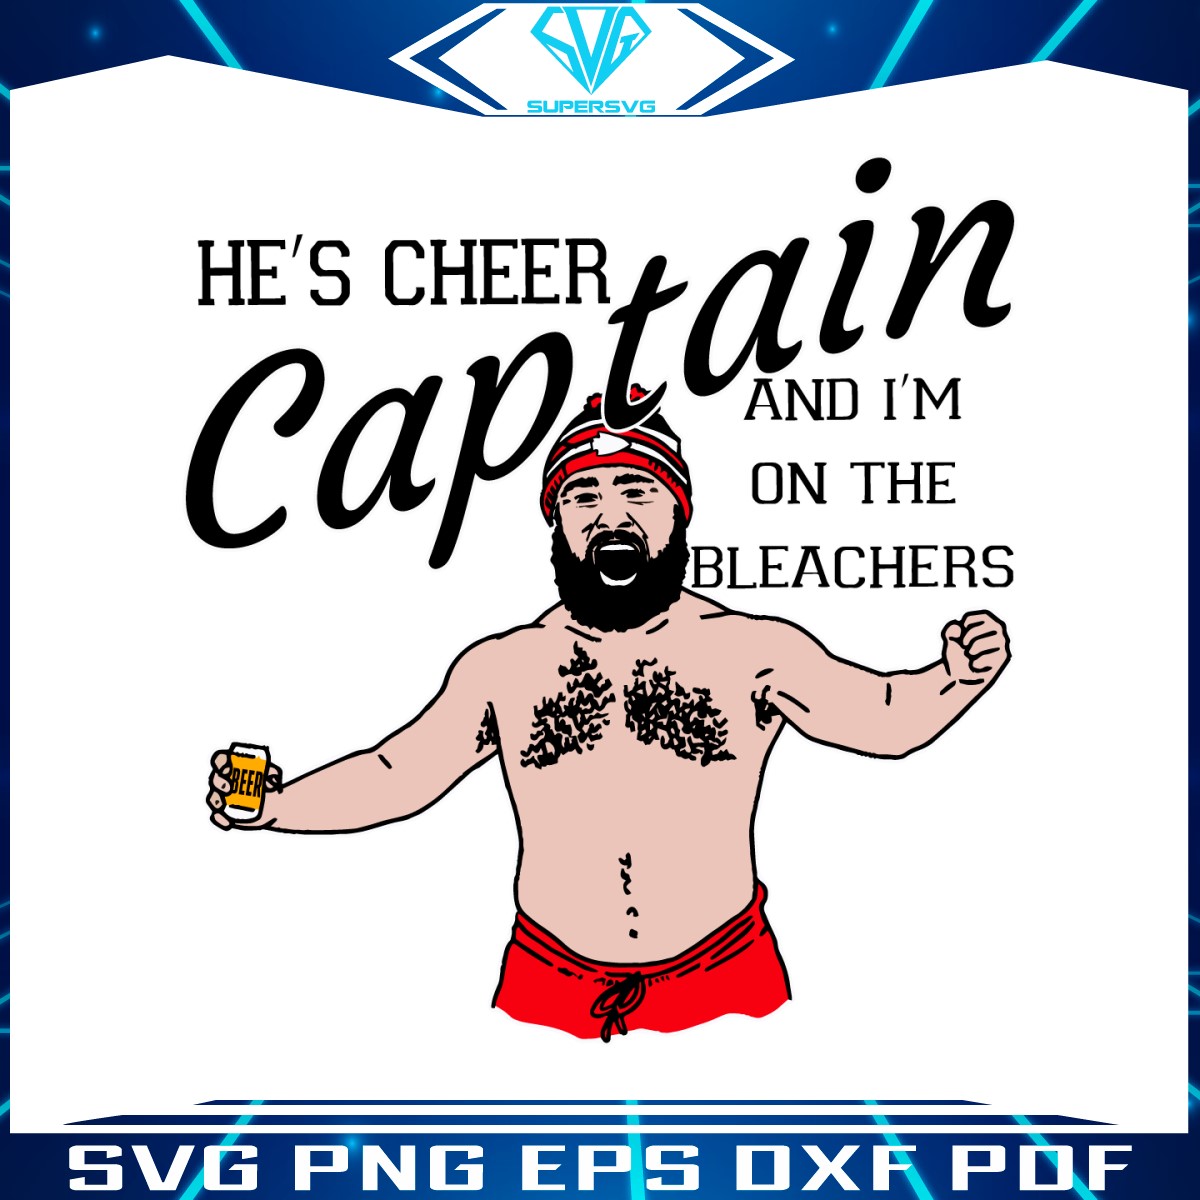 hes-cheer-captain-and-im-on-the-bleachers-svg